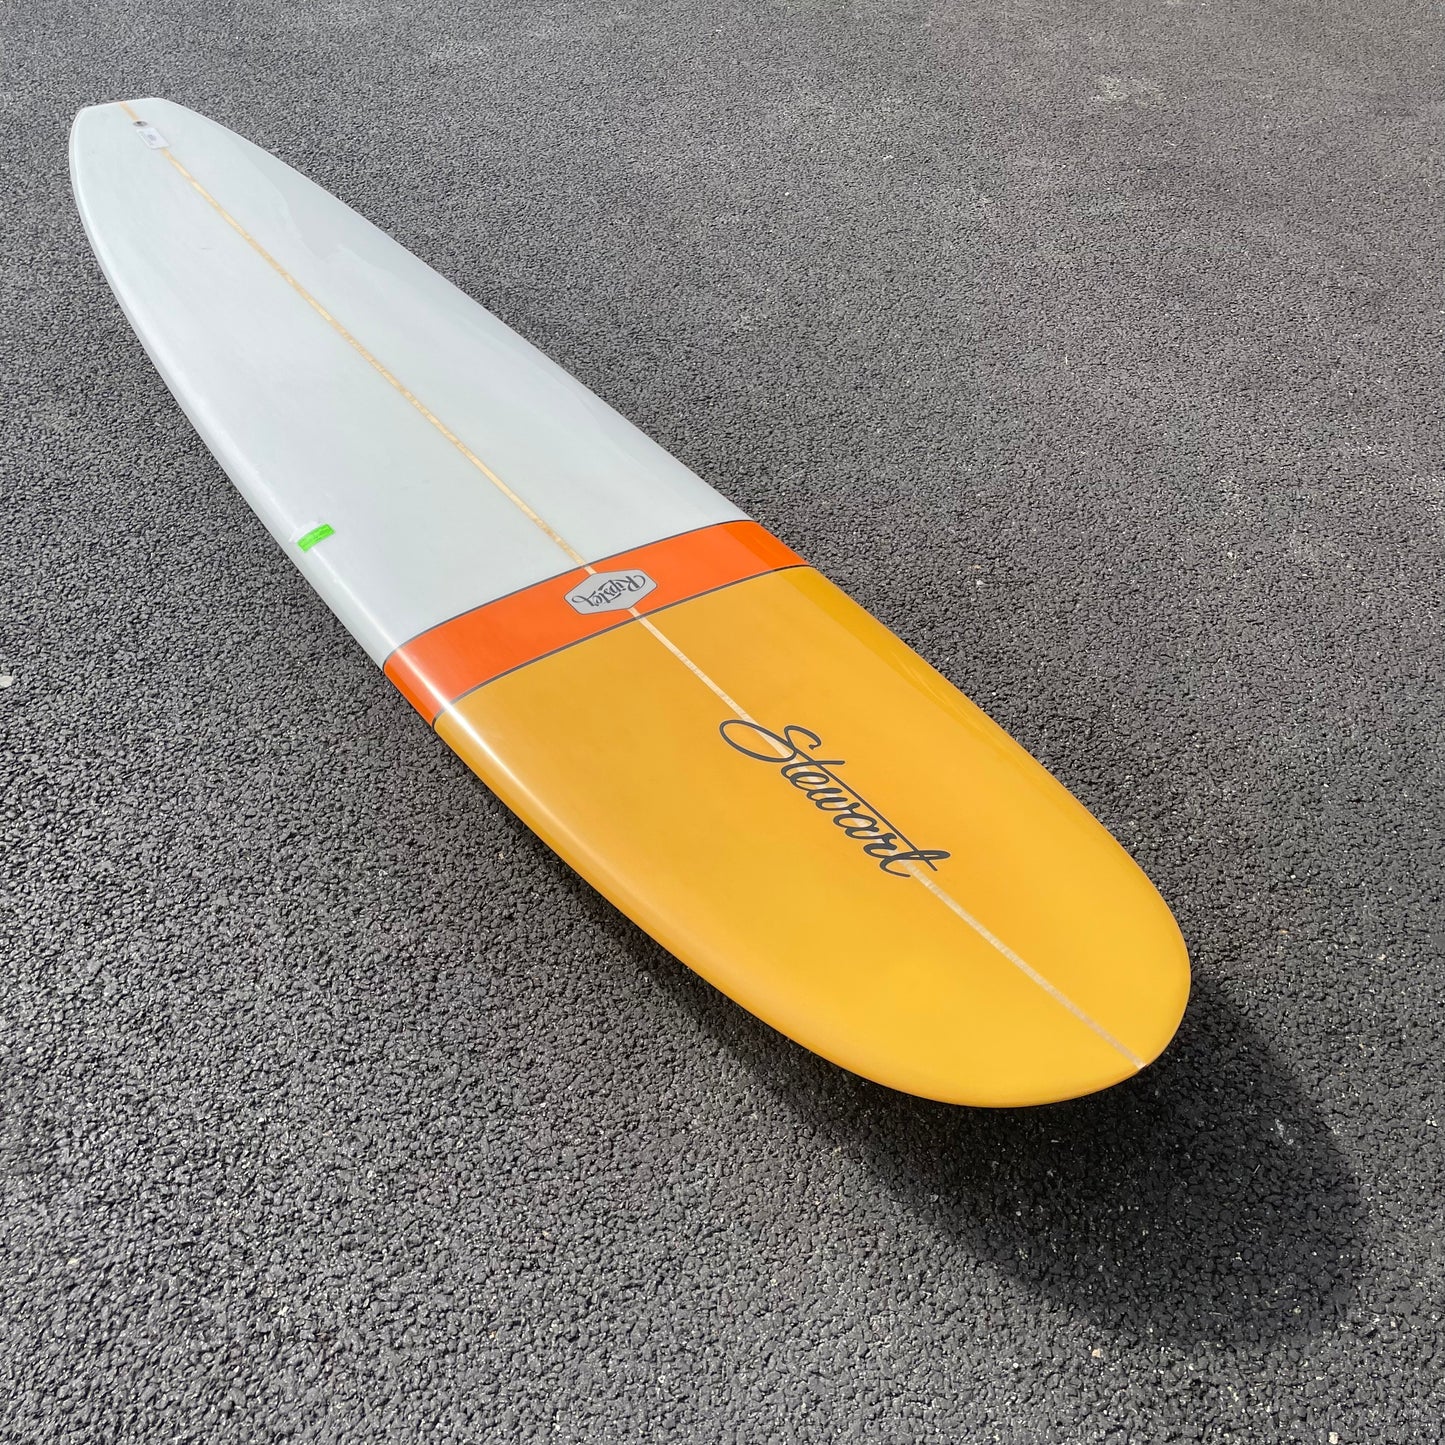 Ripster | 9'0" X 23 1/2" X 2 7/8" | G&P